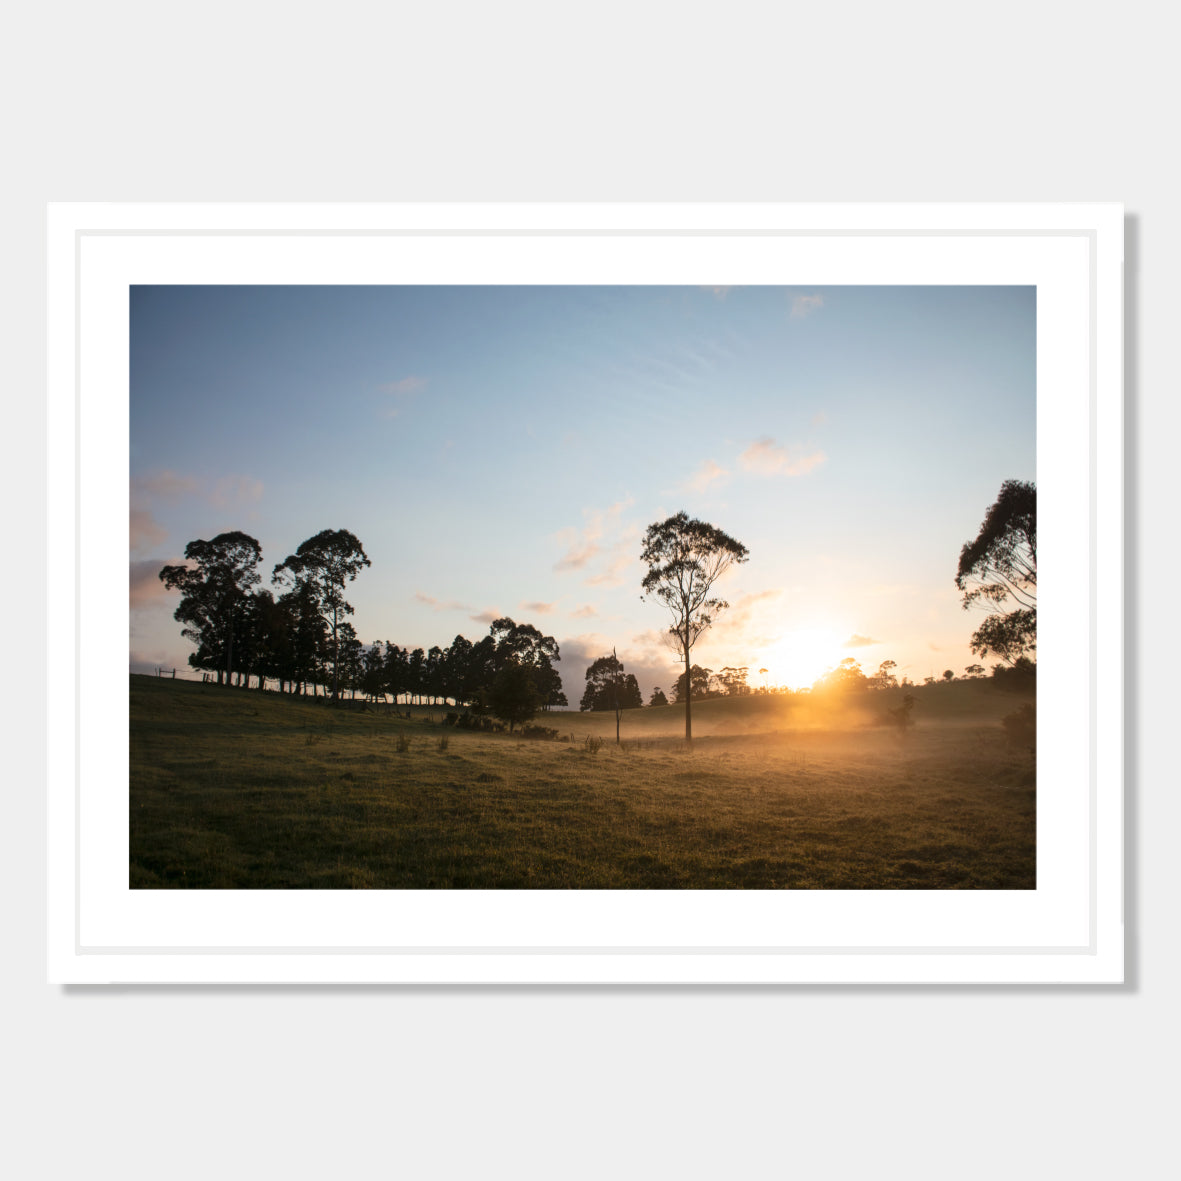 Photographic art print of sunrise in Northland, New Zealand by Chris Starkey. Printed in New Zealand by endemicworld framed in white.